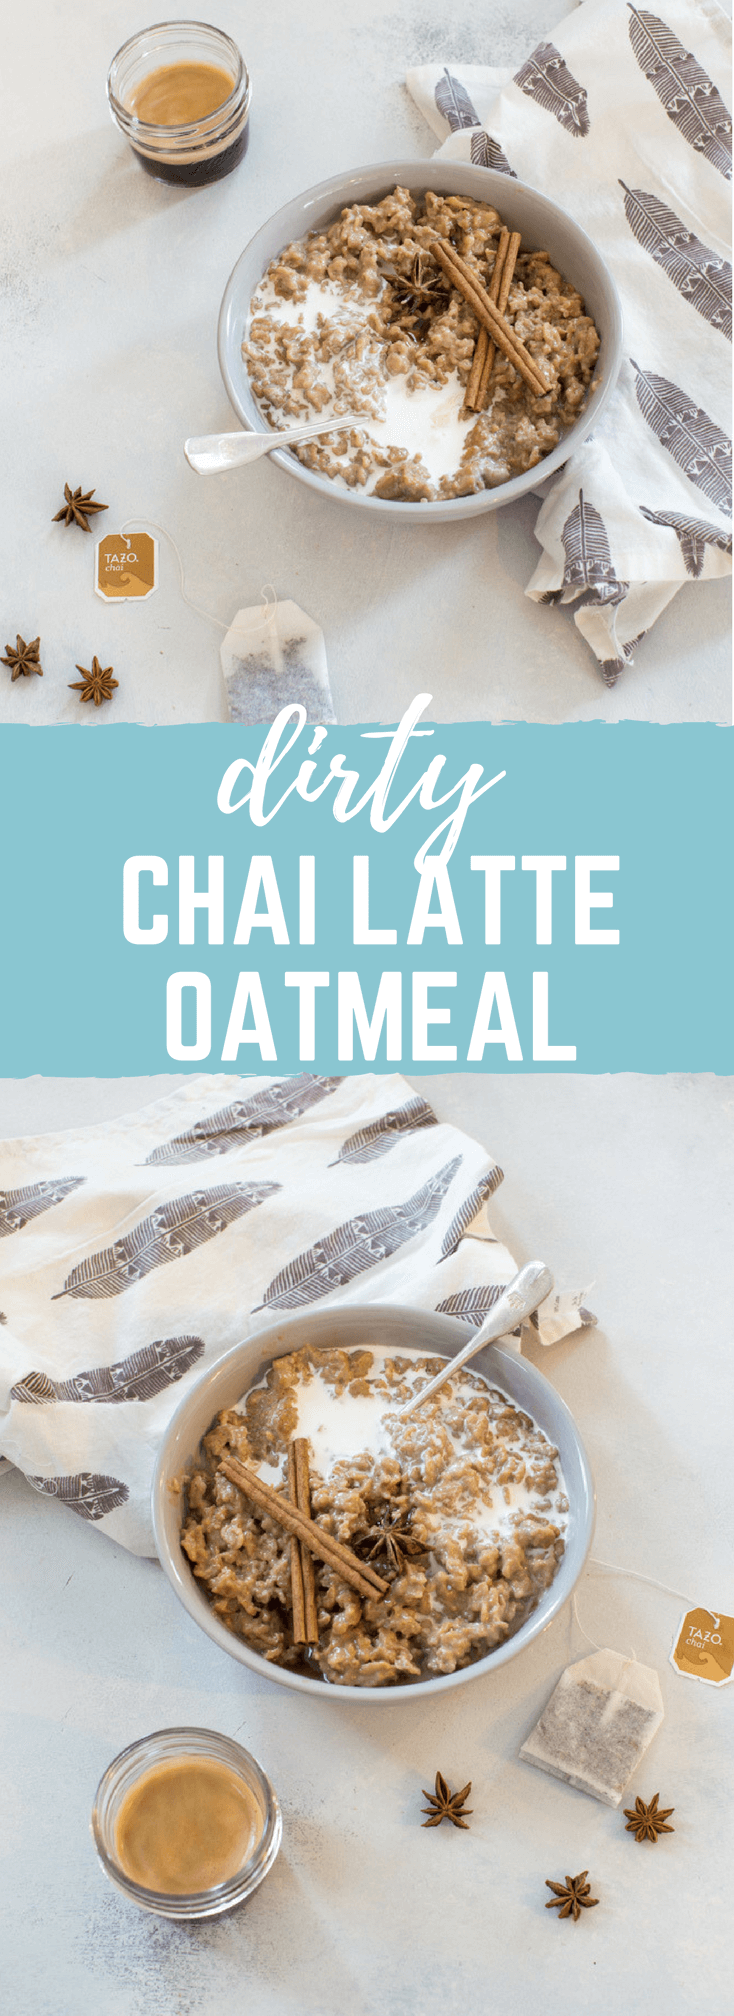 If you're a chai latte lover but like to live on the dark (errr caffeinated) side with espresso this Dirty Chai Latte Oatmeal is for you. Creamy oatmeal infused with chai tea and drowned in a shot of espresso. Breakfast of champions.